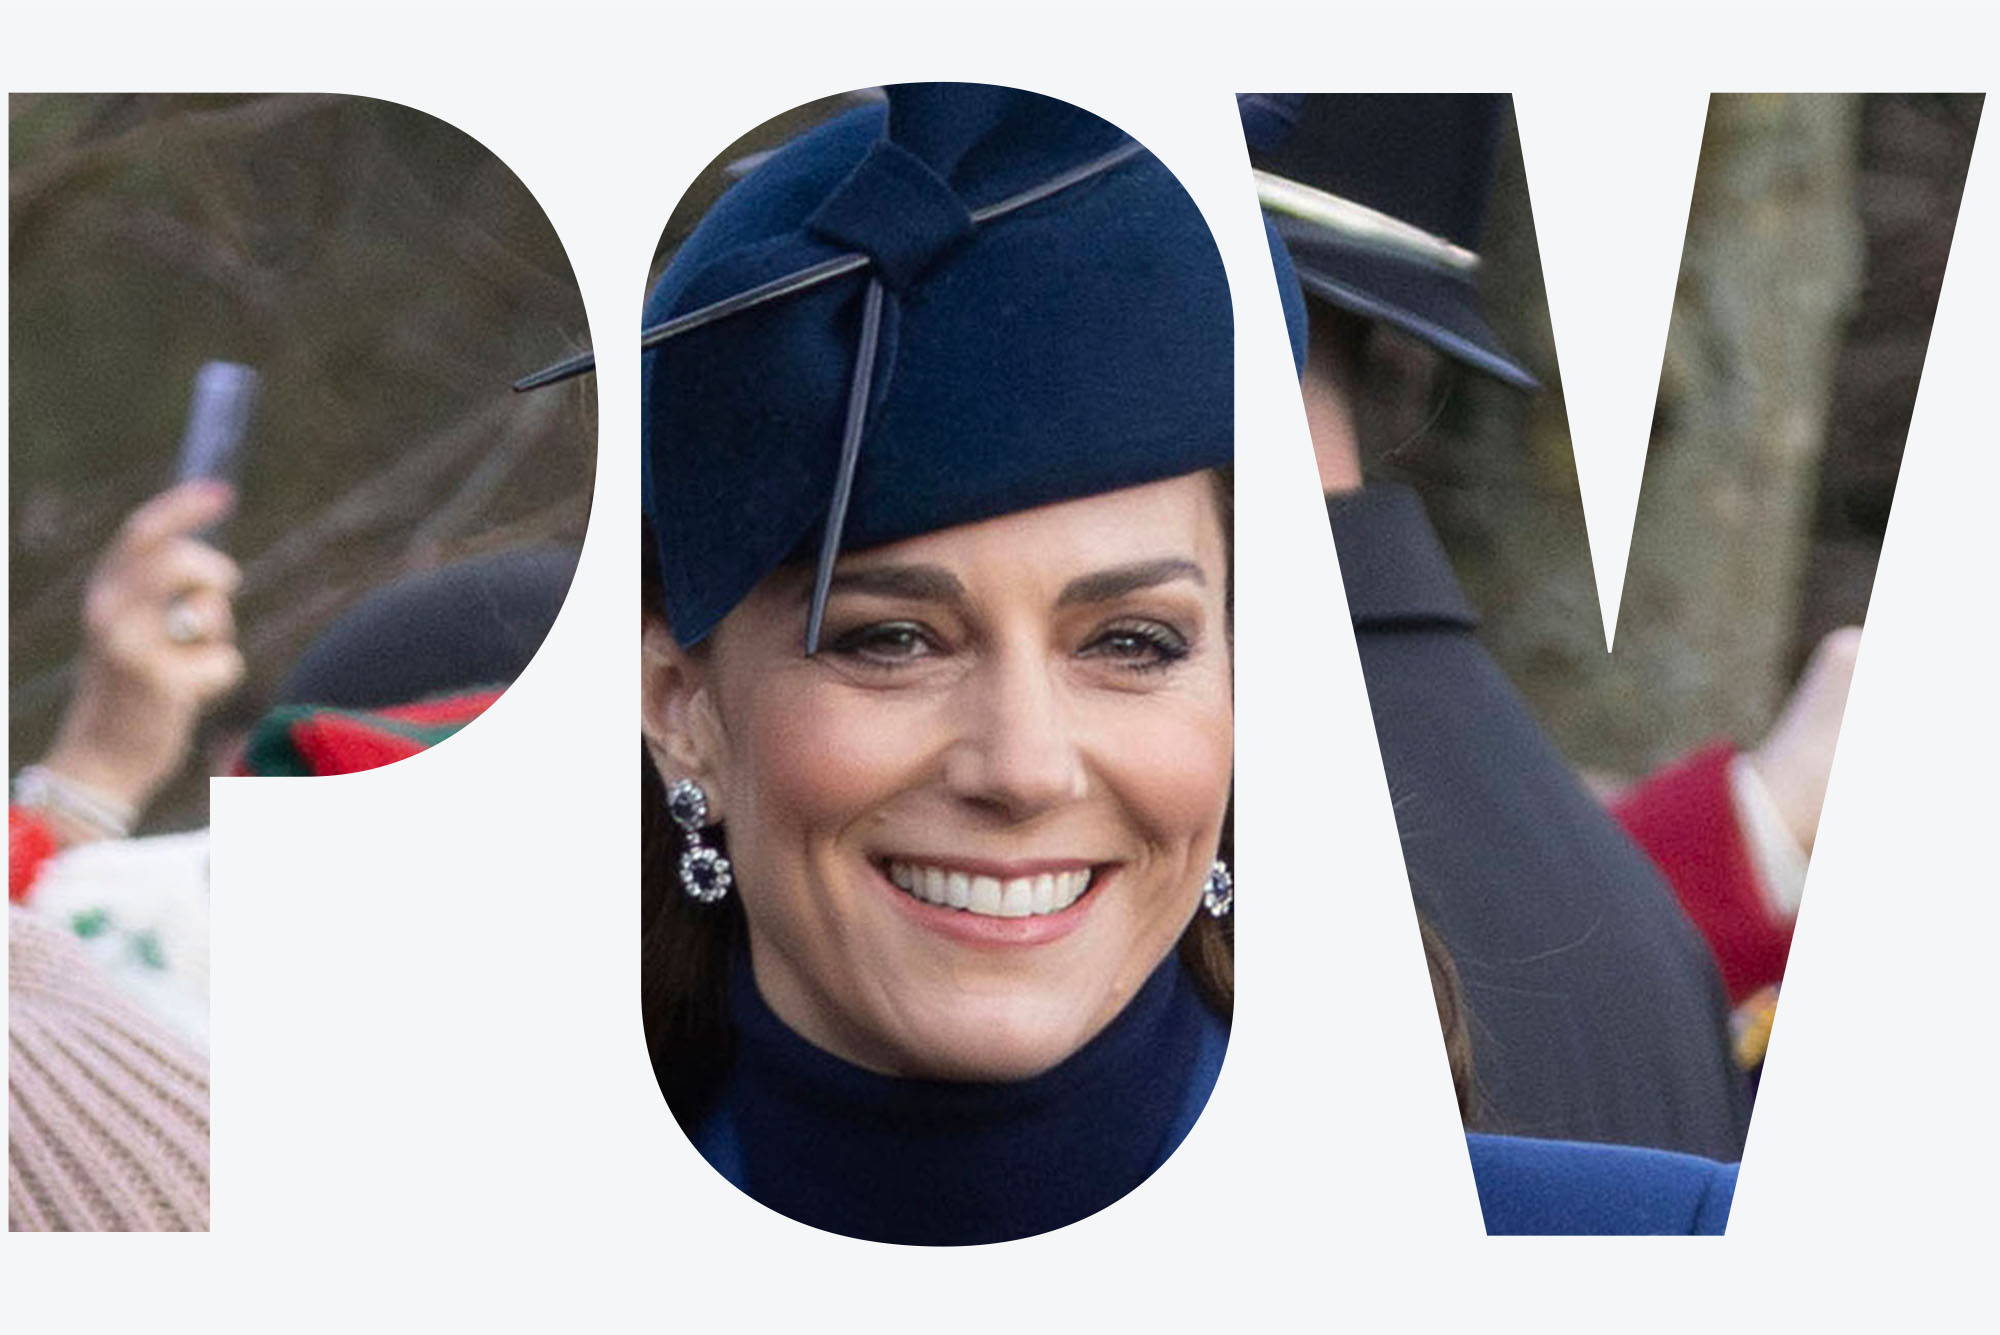 Photo: A picture of Kate Middleton wearing a blue hat and matching blue suit with a black shirt under